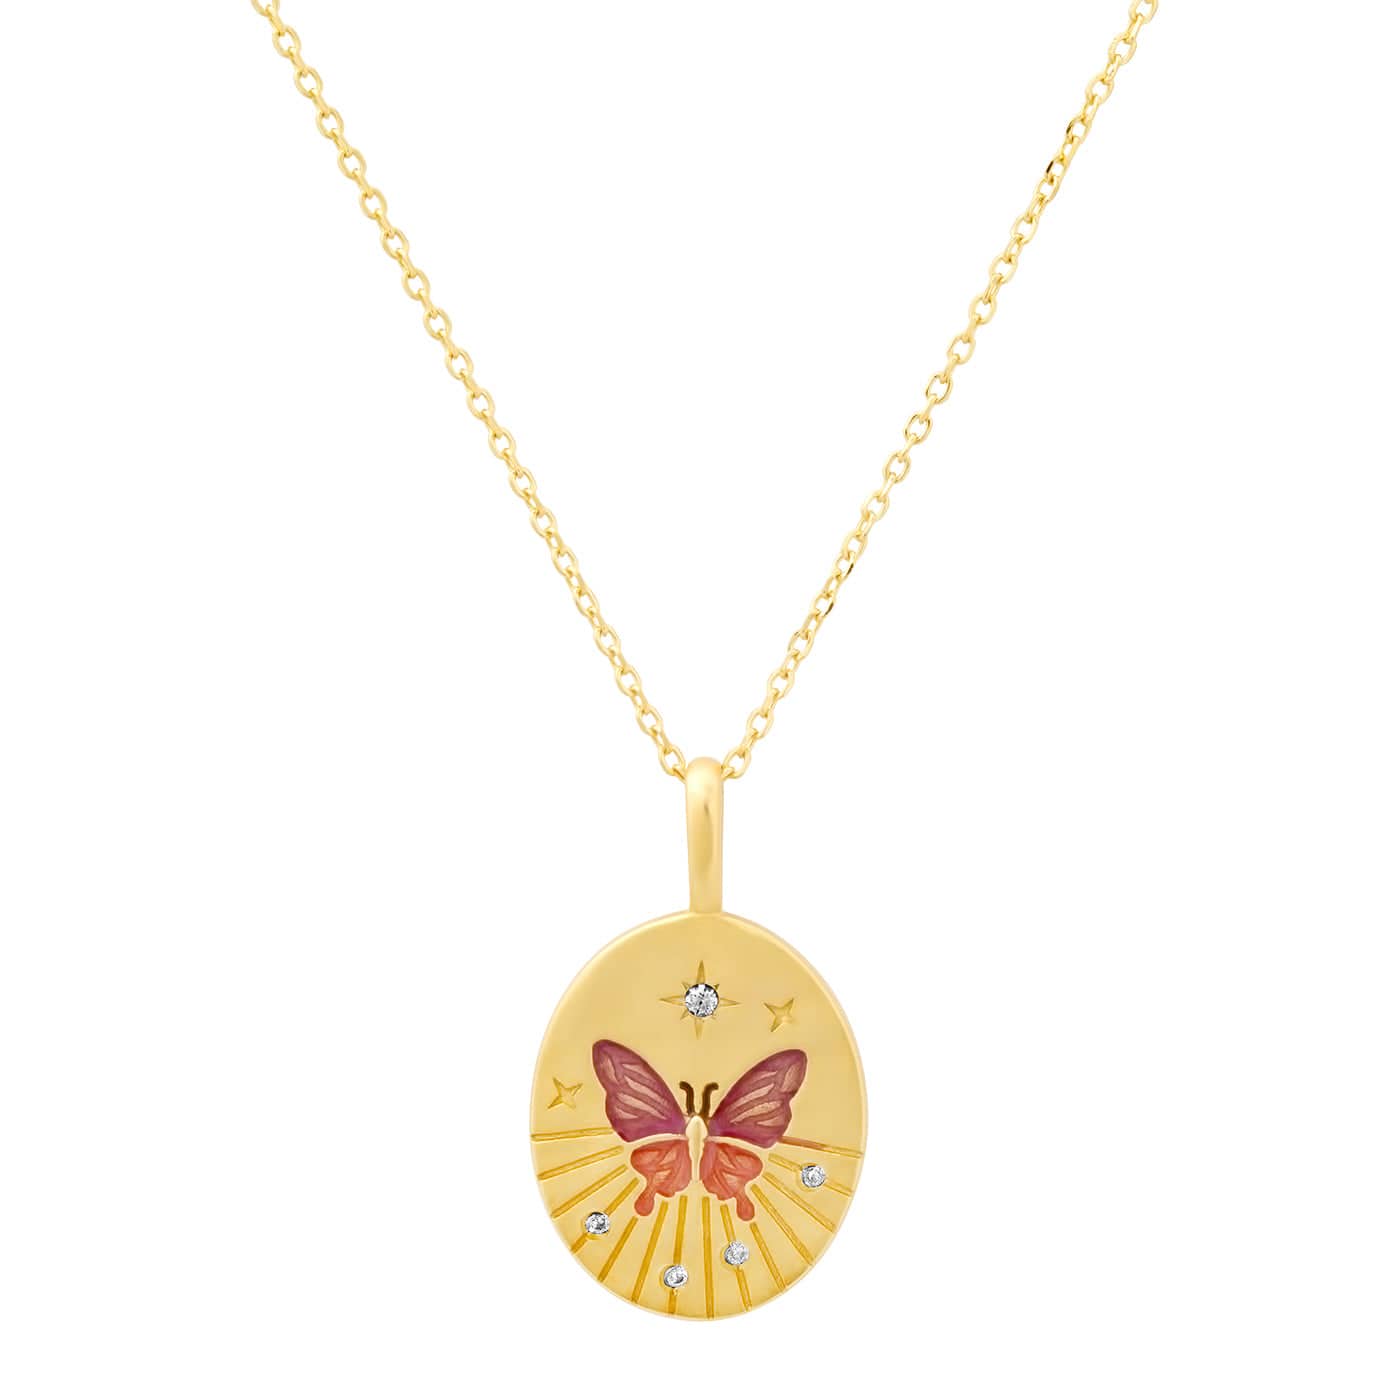 TAI JEWELRY Necklace Butterfly Coin Pendant Necklace